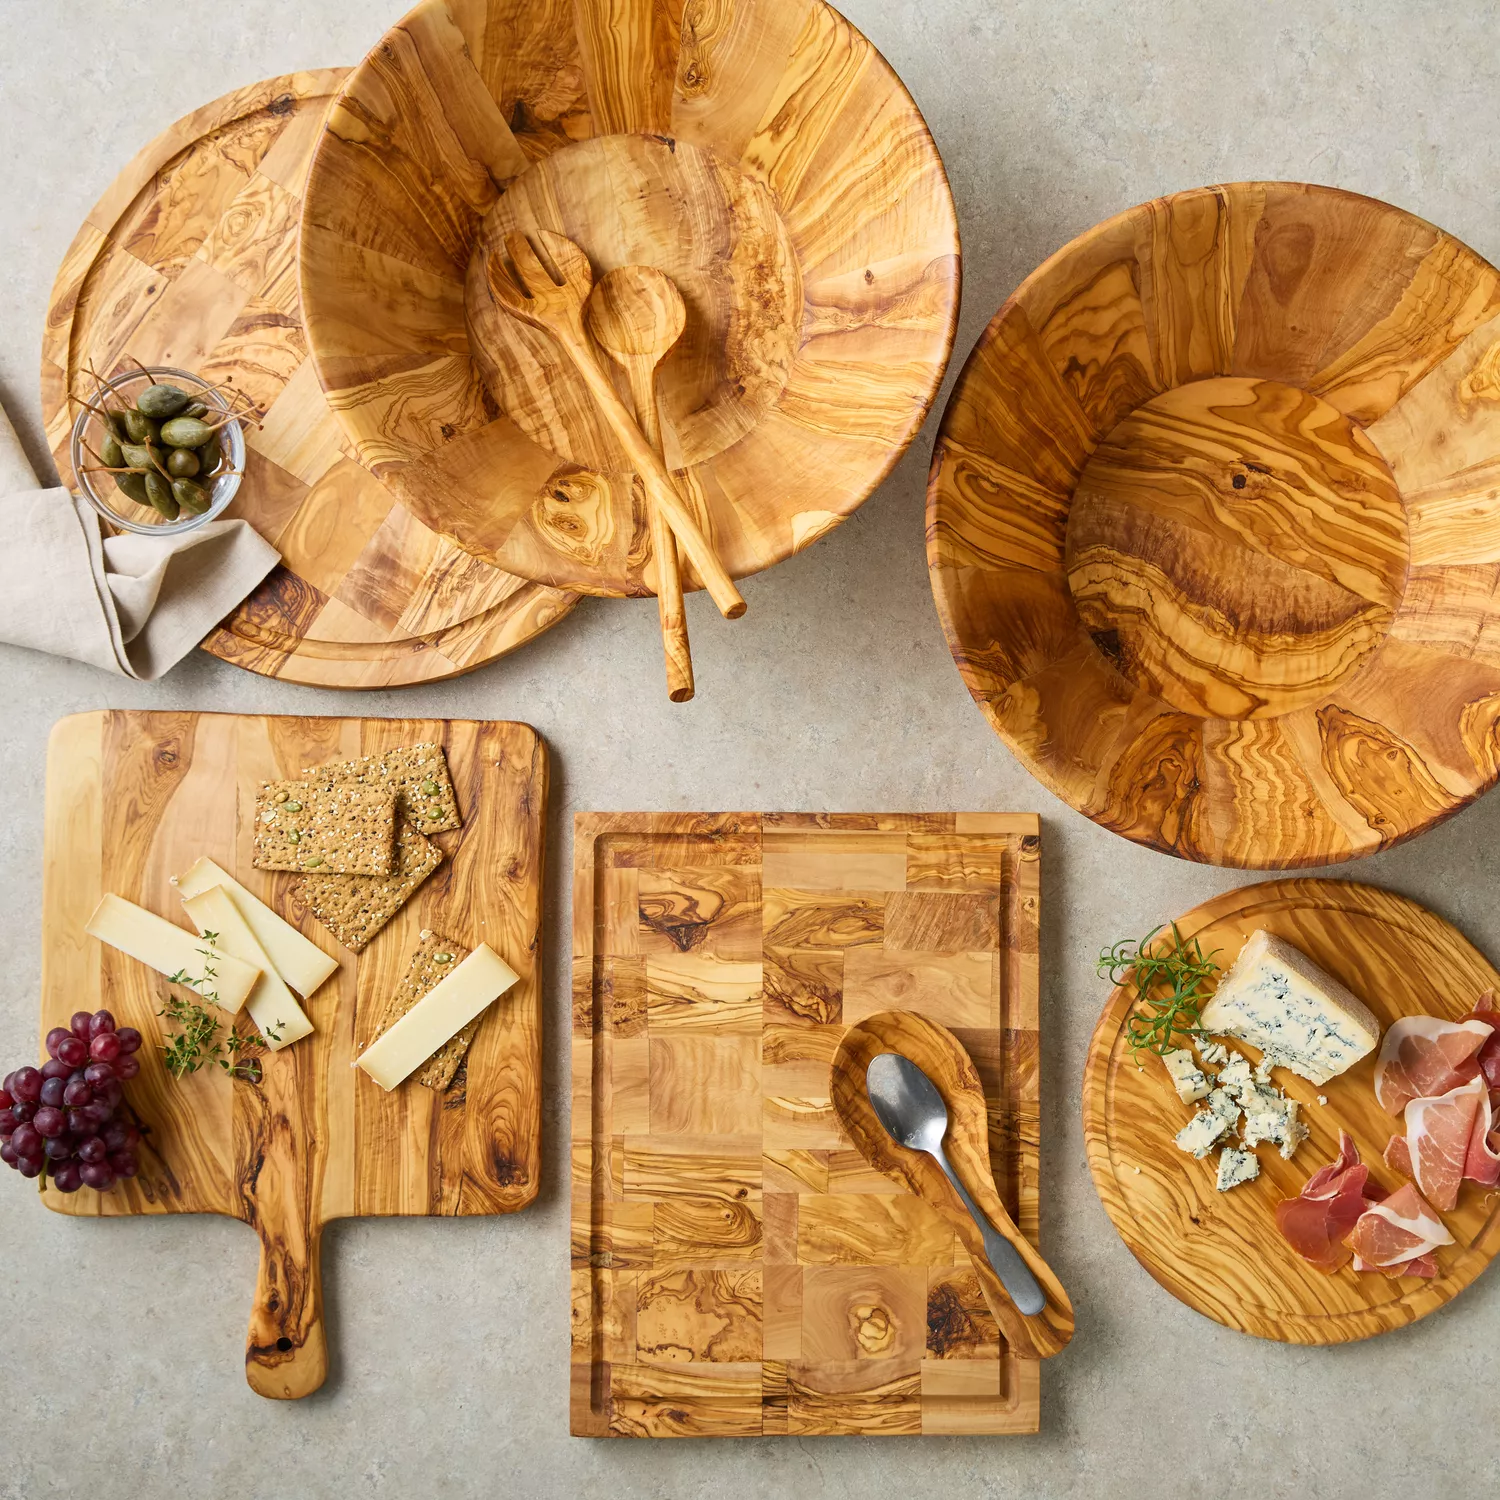 Sur La Table Italian Olivewood Round Cheese Board